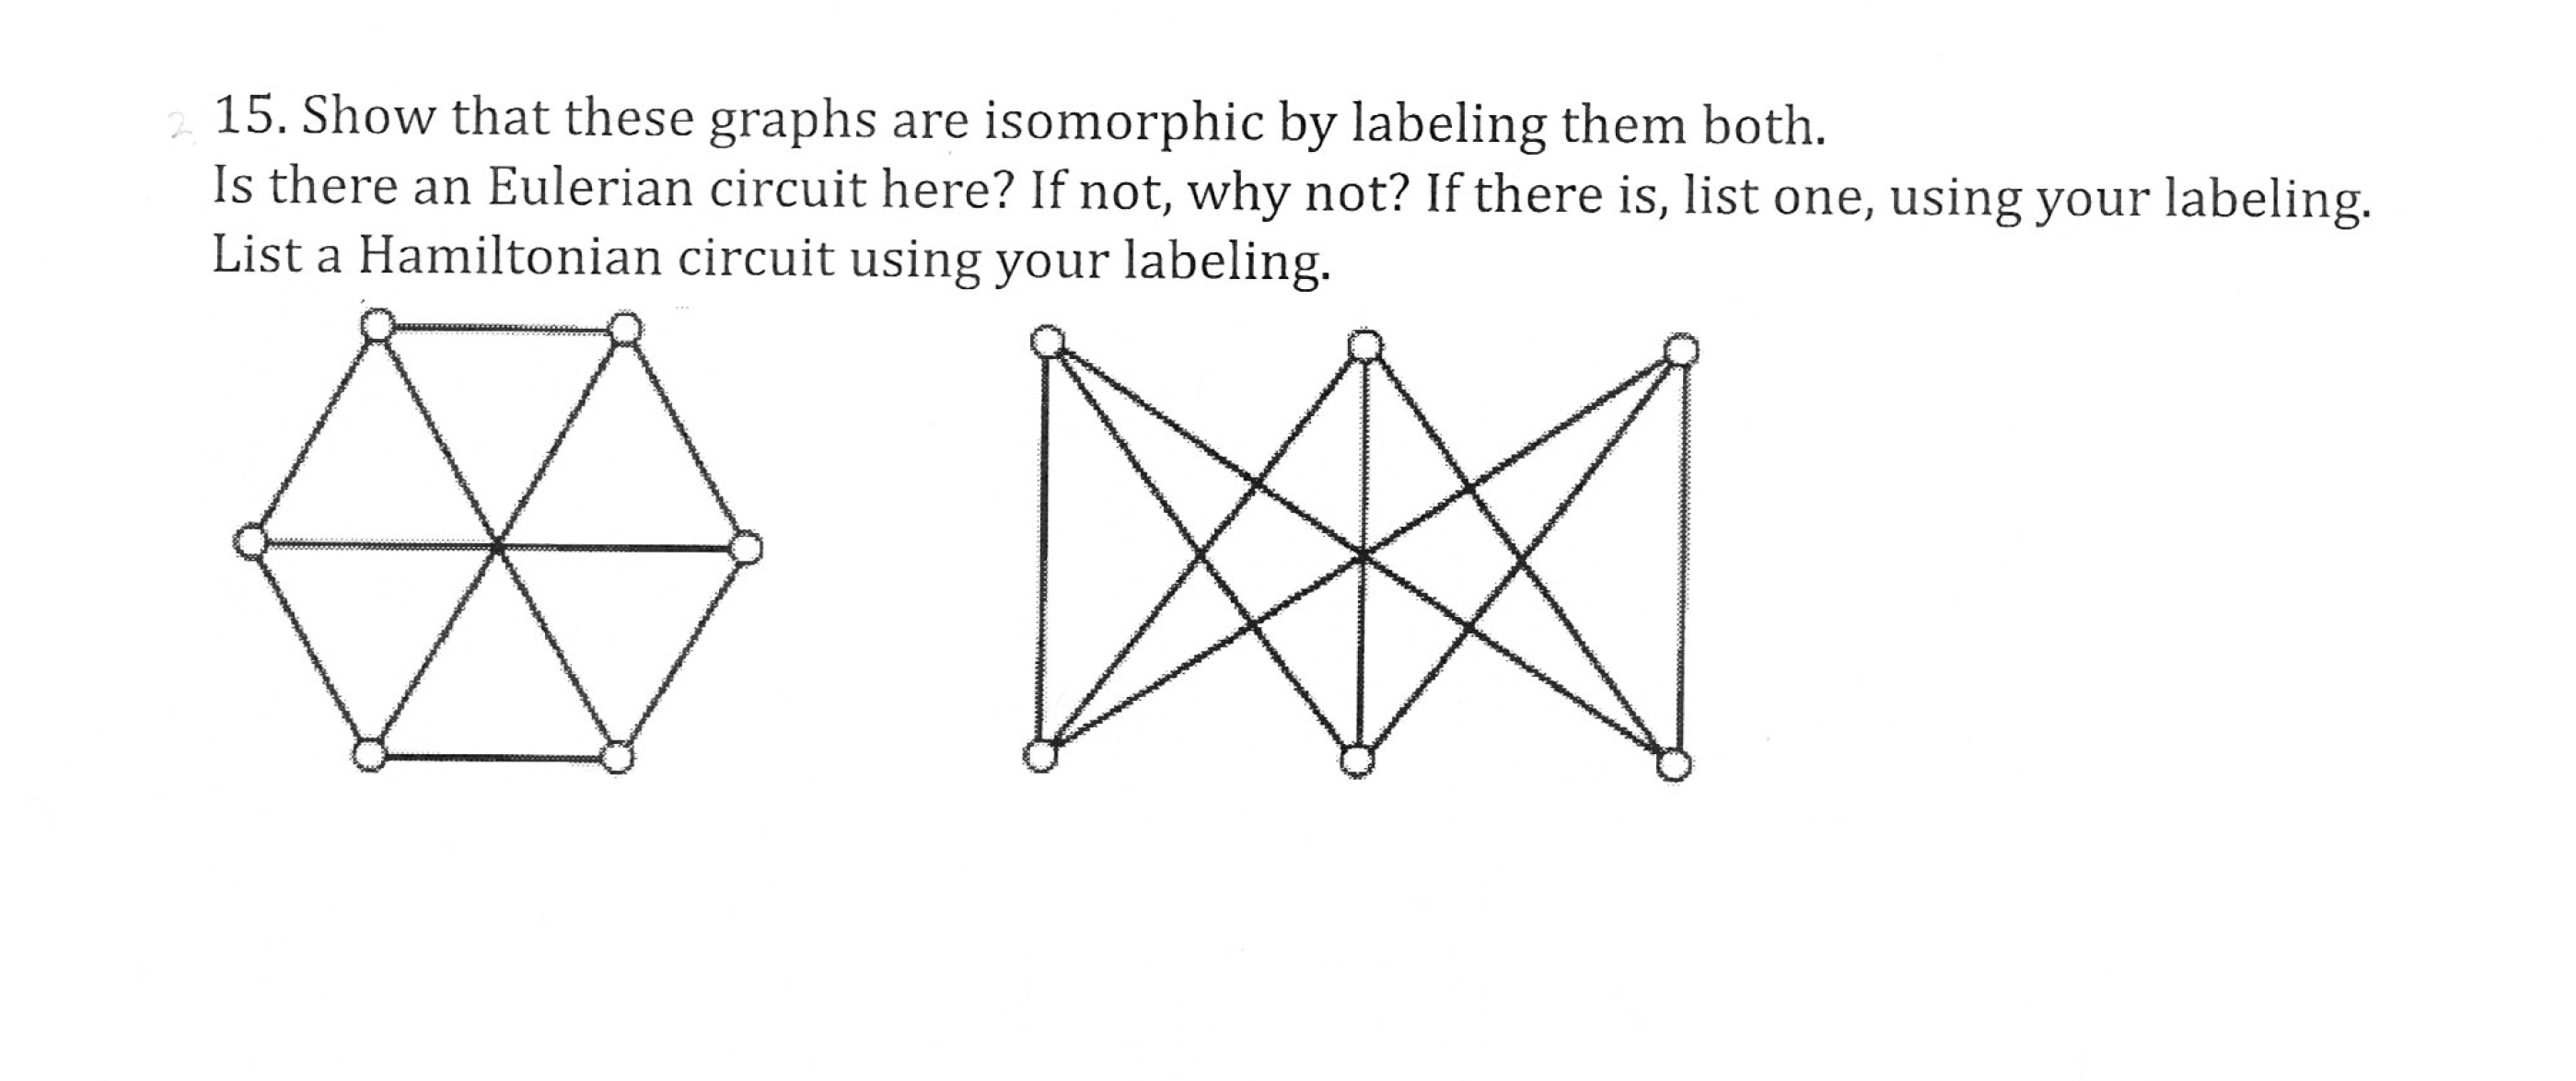 15. Show that these graphs are isomorphic by labeling them both.
Is there an Eulerian circuit here? If not, why not? If there is, list one, using your labeling.
List a Hamiltonian circuit using your labeling.
